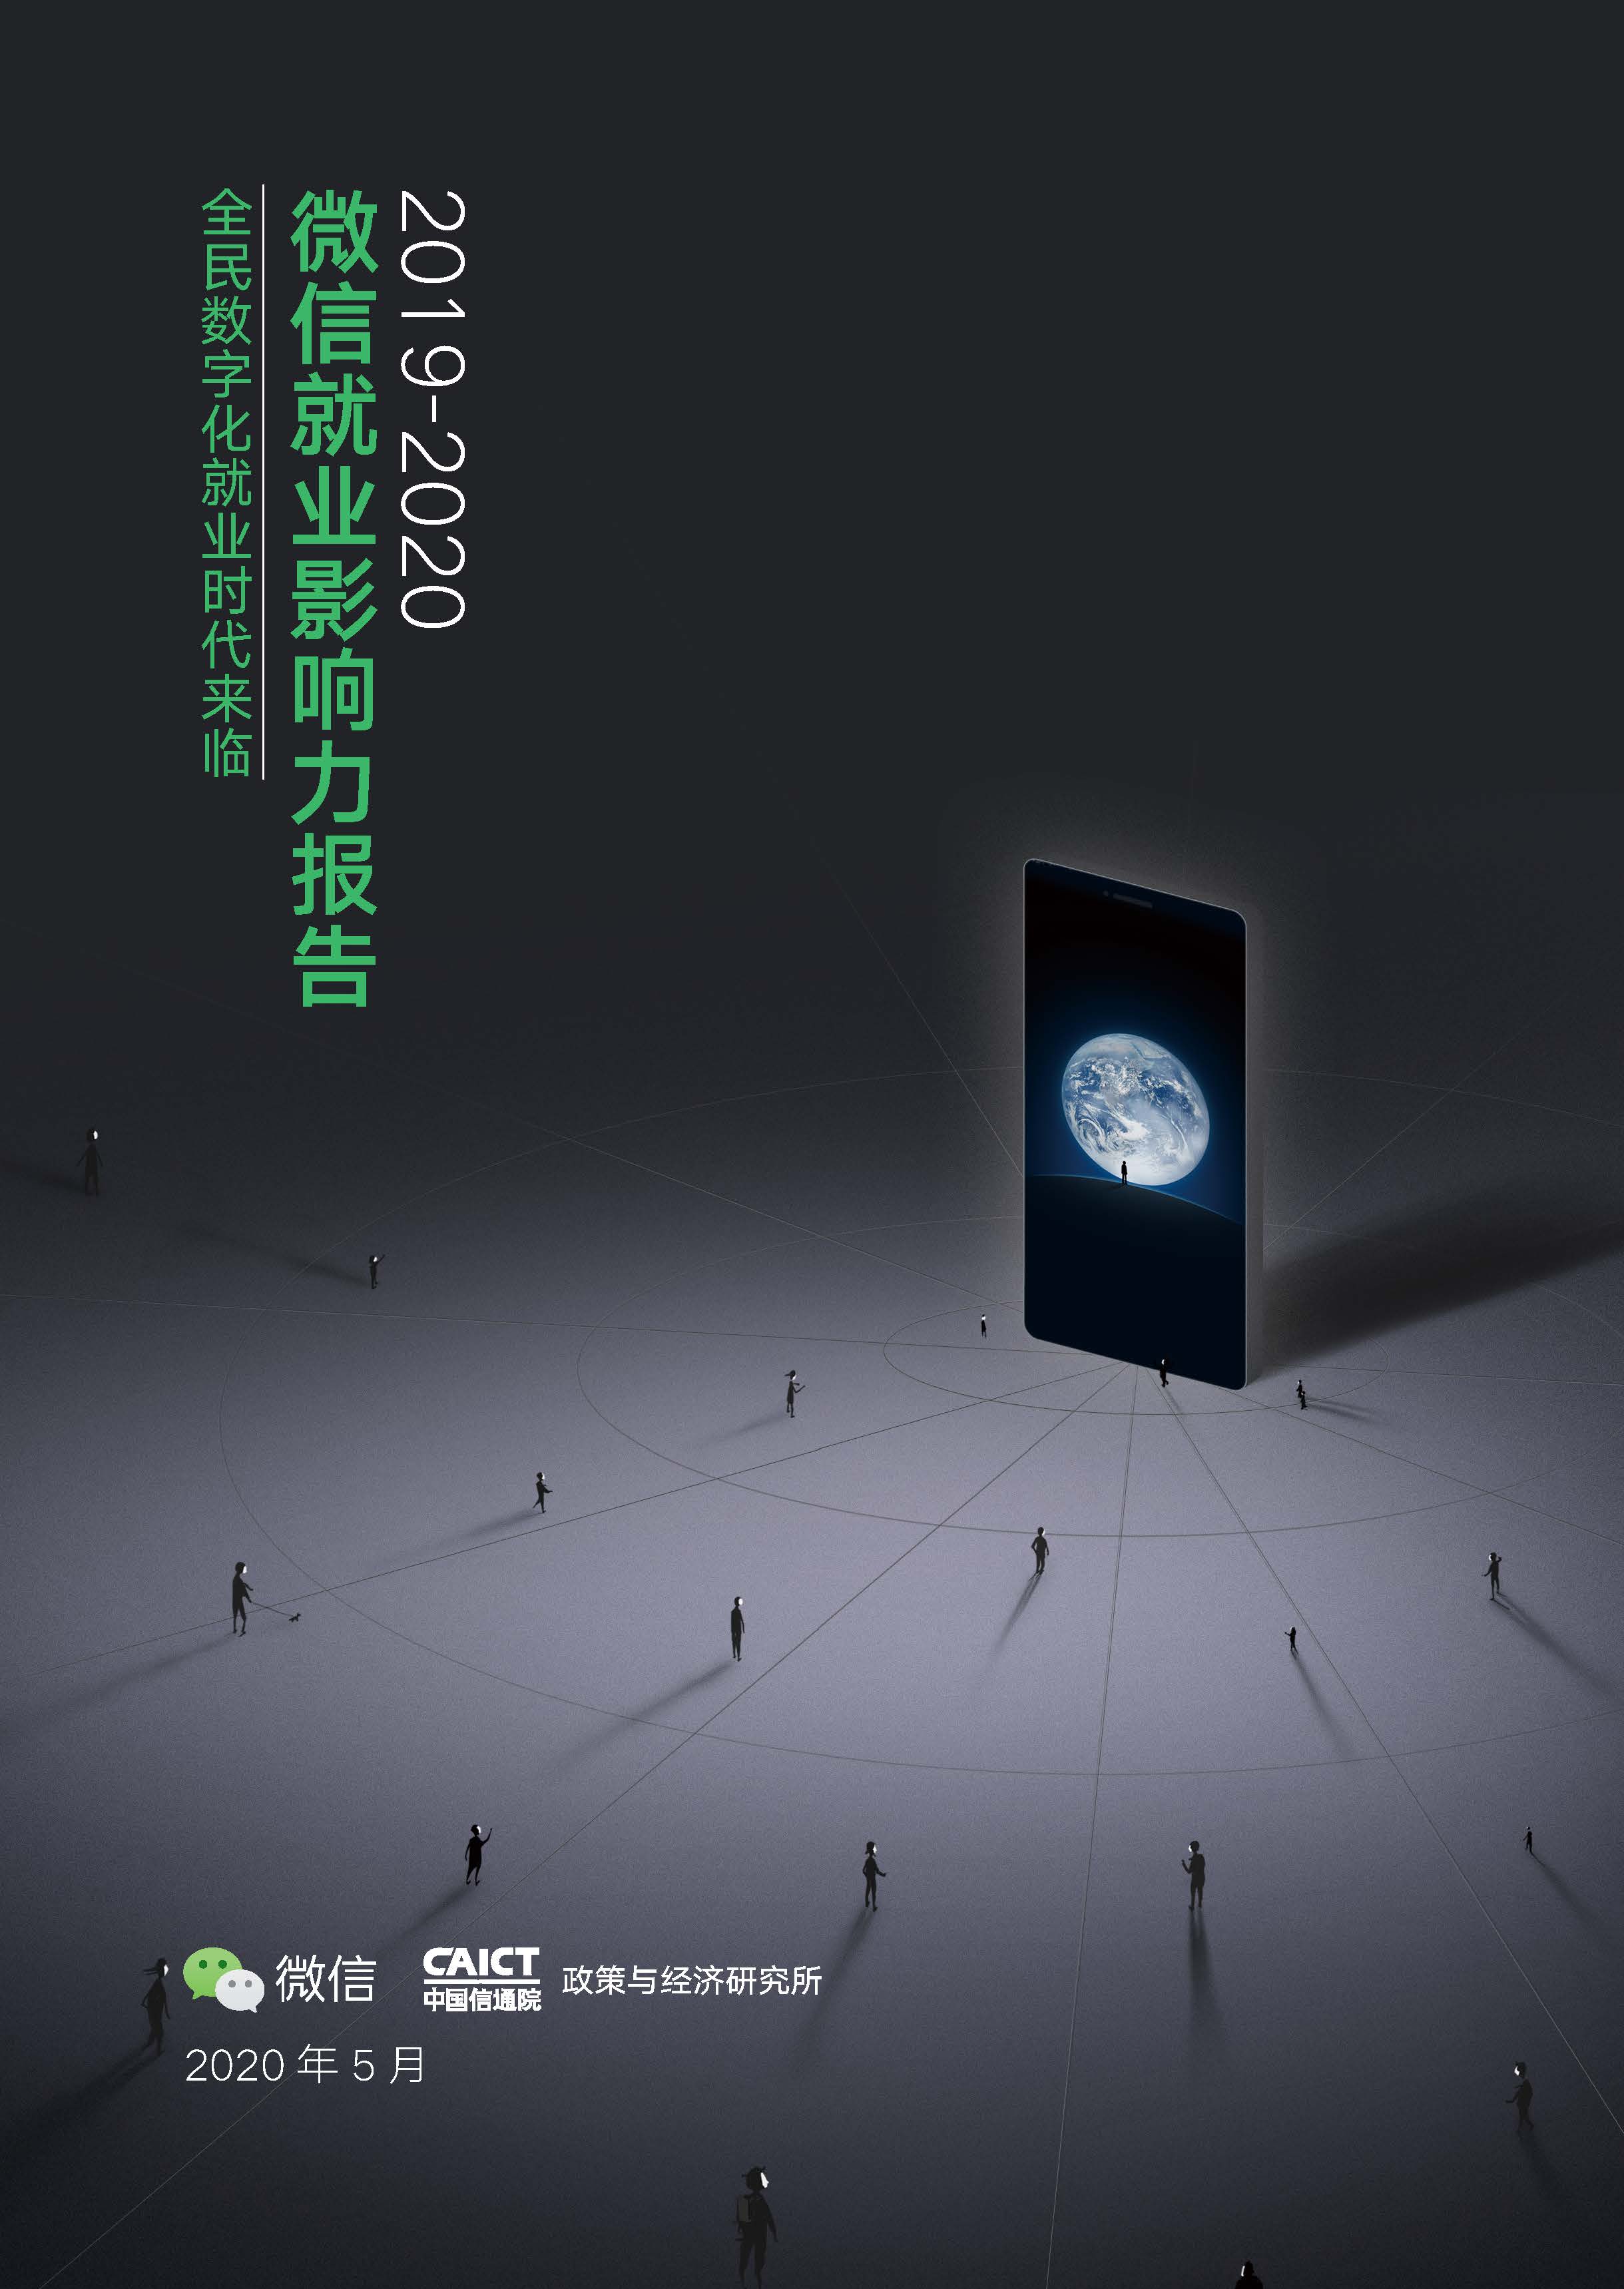 Pages from 《2019-2020微信就业影响力报告》.jpg